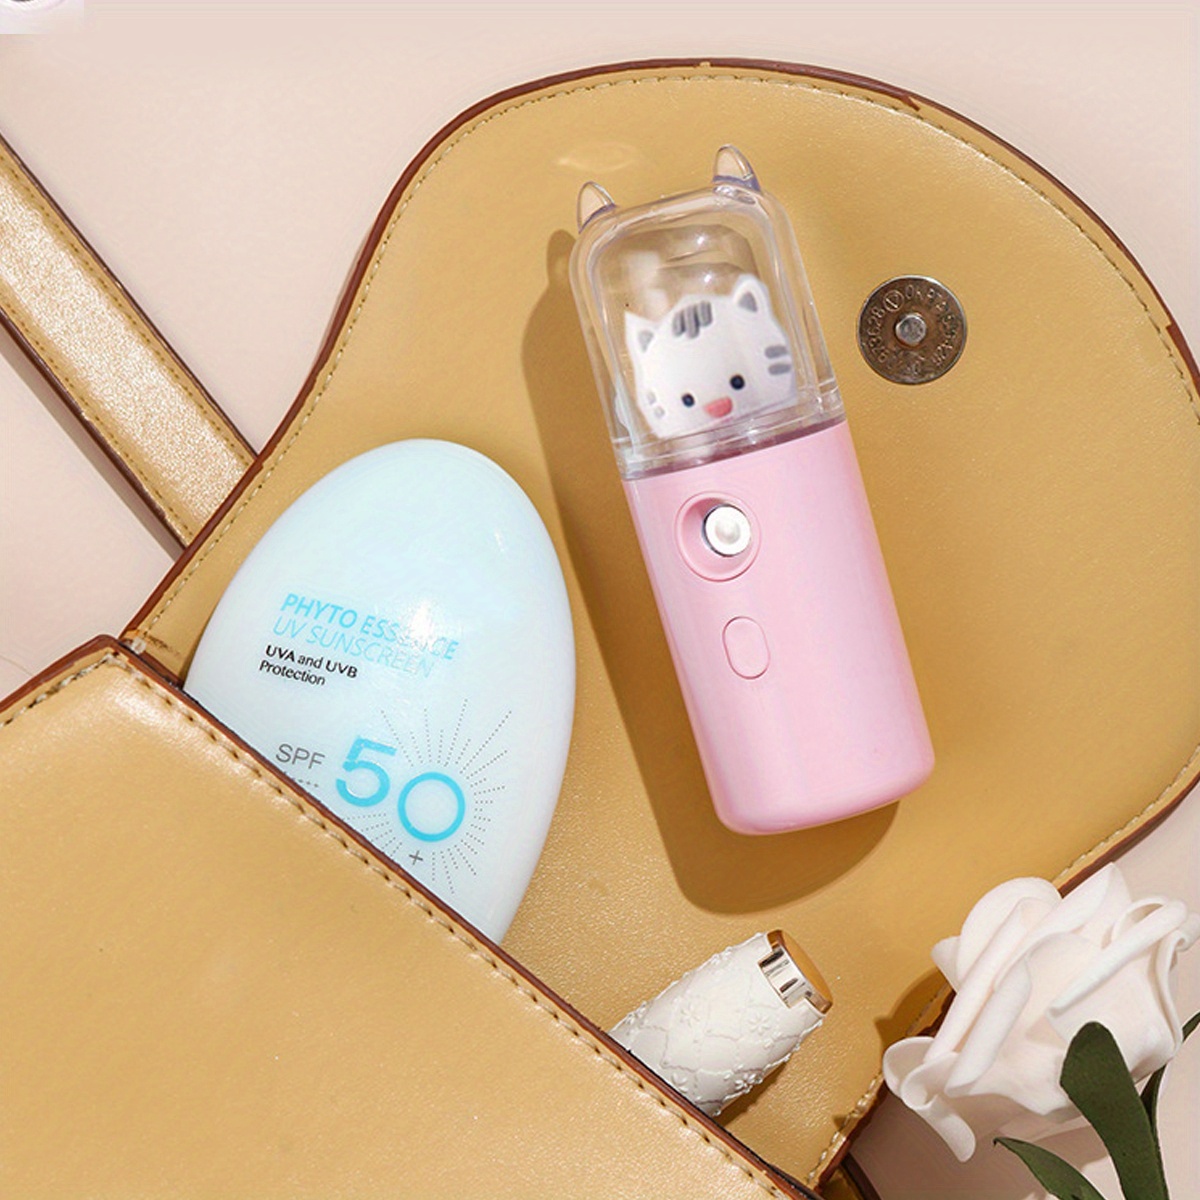 cute nano facial mister with colorful night light cartoon pet design mini face humidifier portable silent facial sprayer usb rechargeable handy skin care machine for face hydrating daily makeup details 2